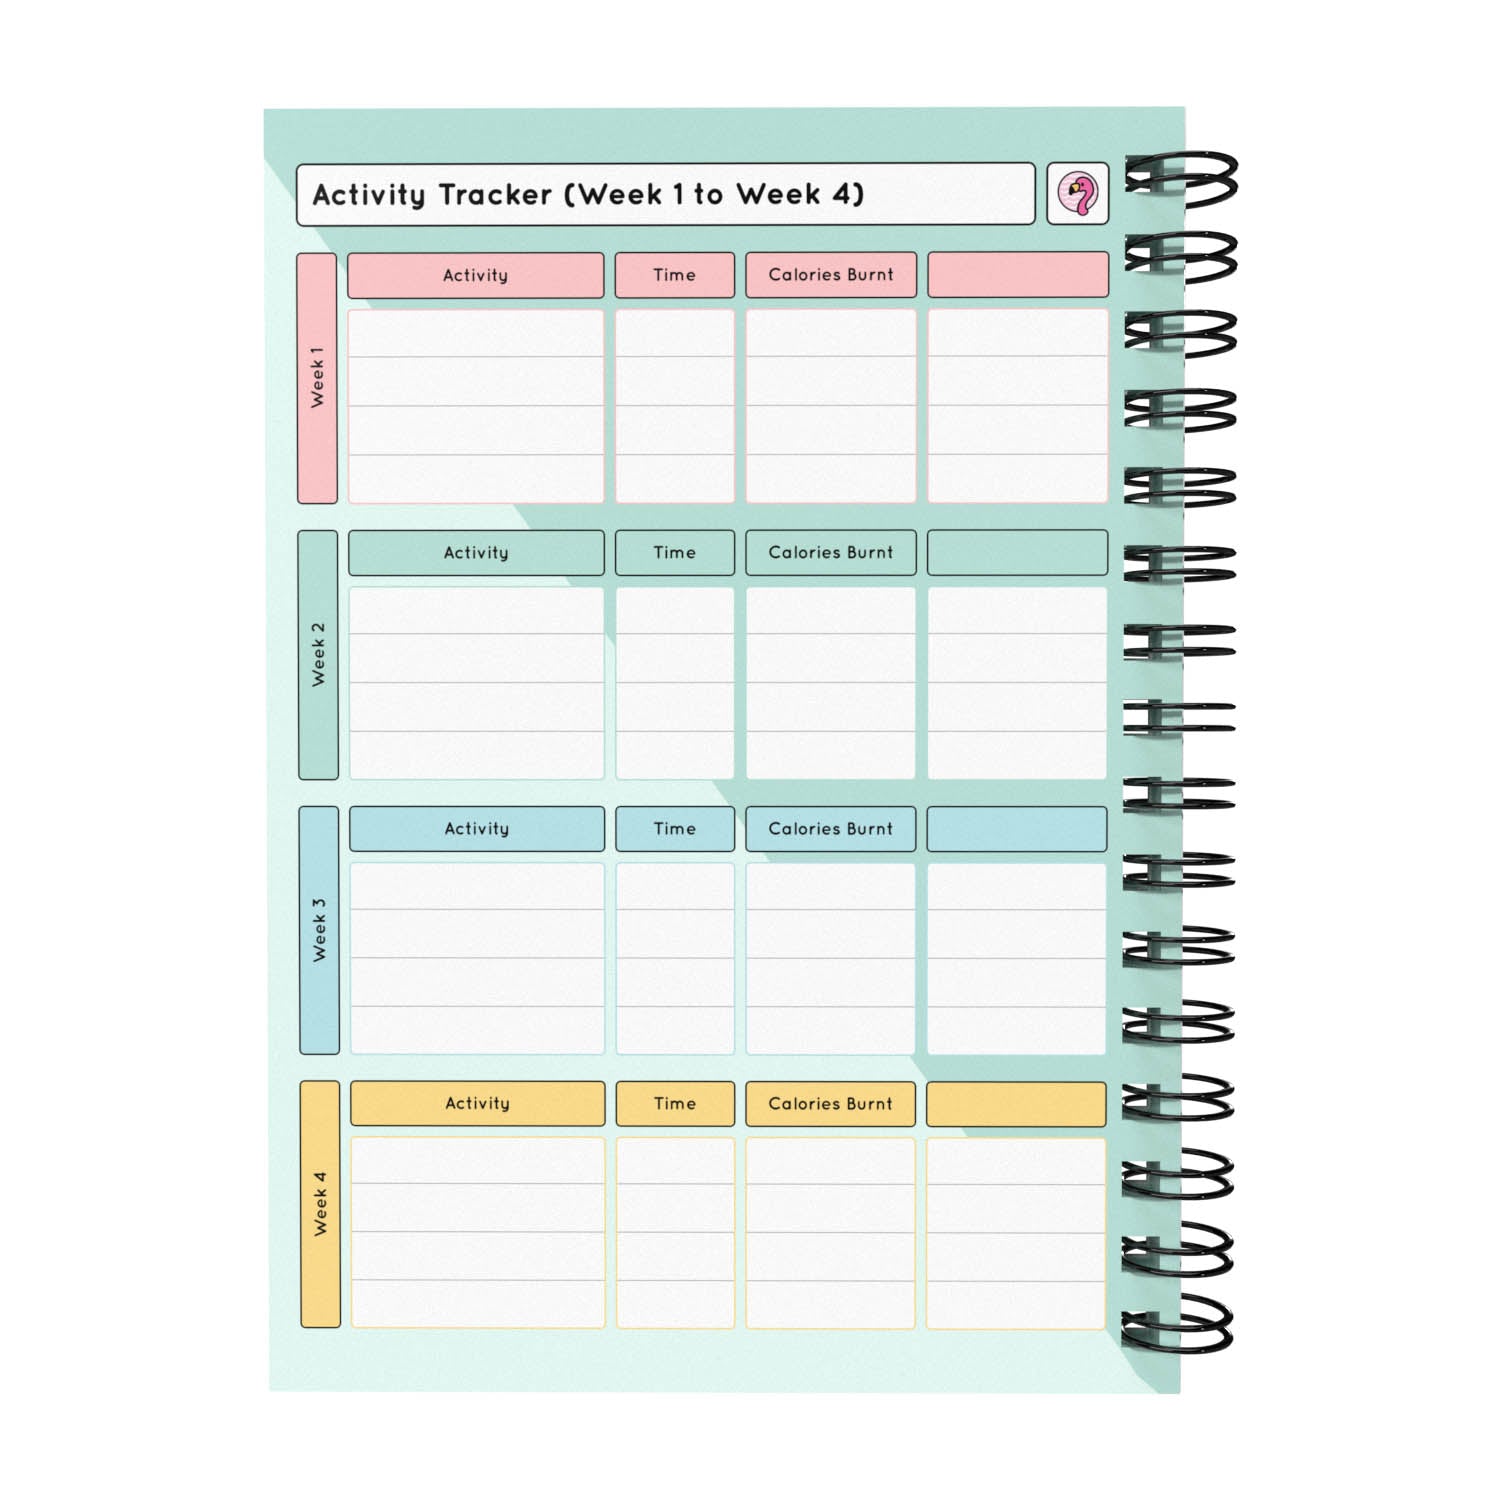 Food Diary - C46 - Slimming World Compatible - Spacious - Fabulous Planning - [W] 7WK - SP3 - C46+